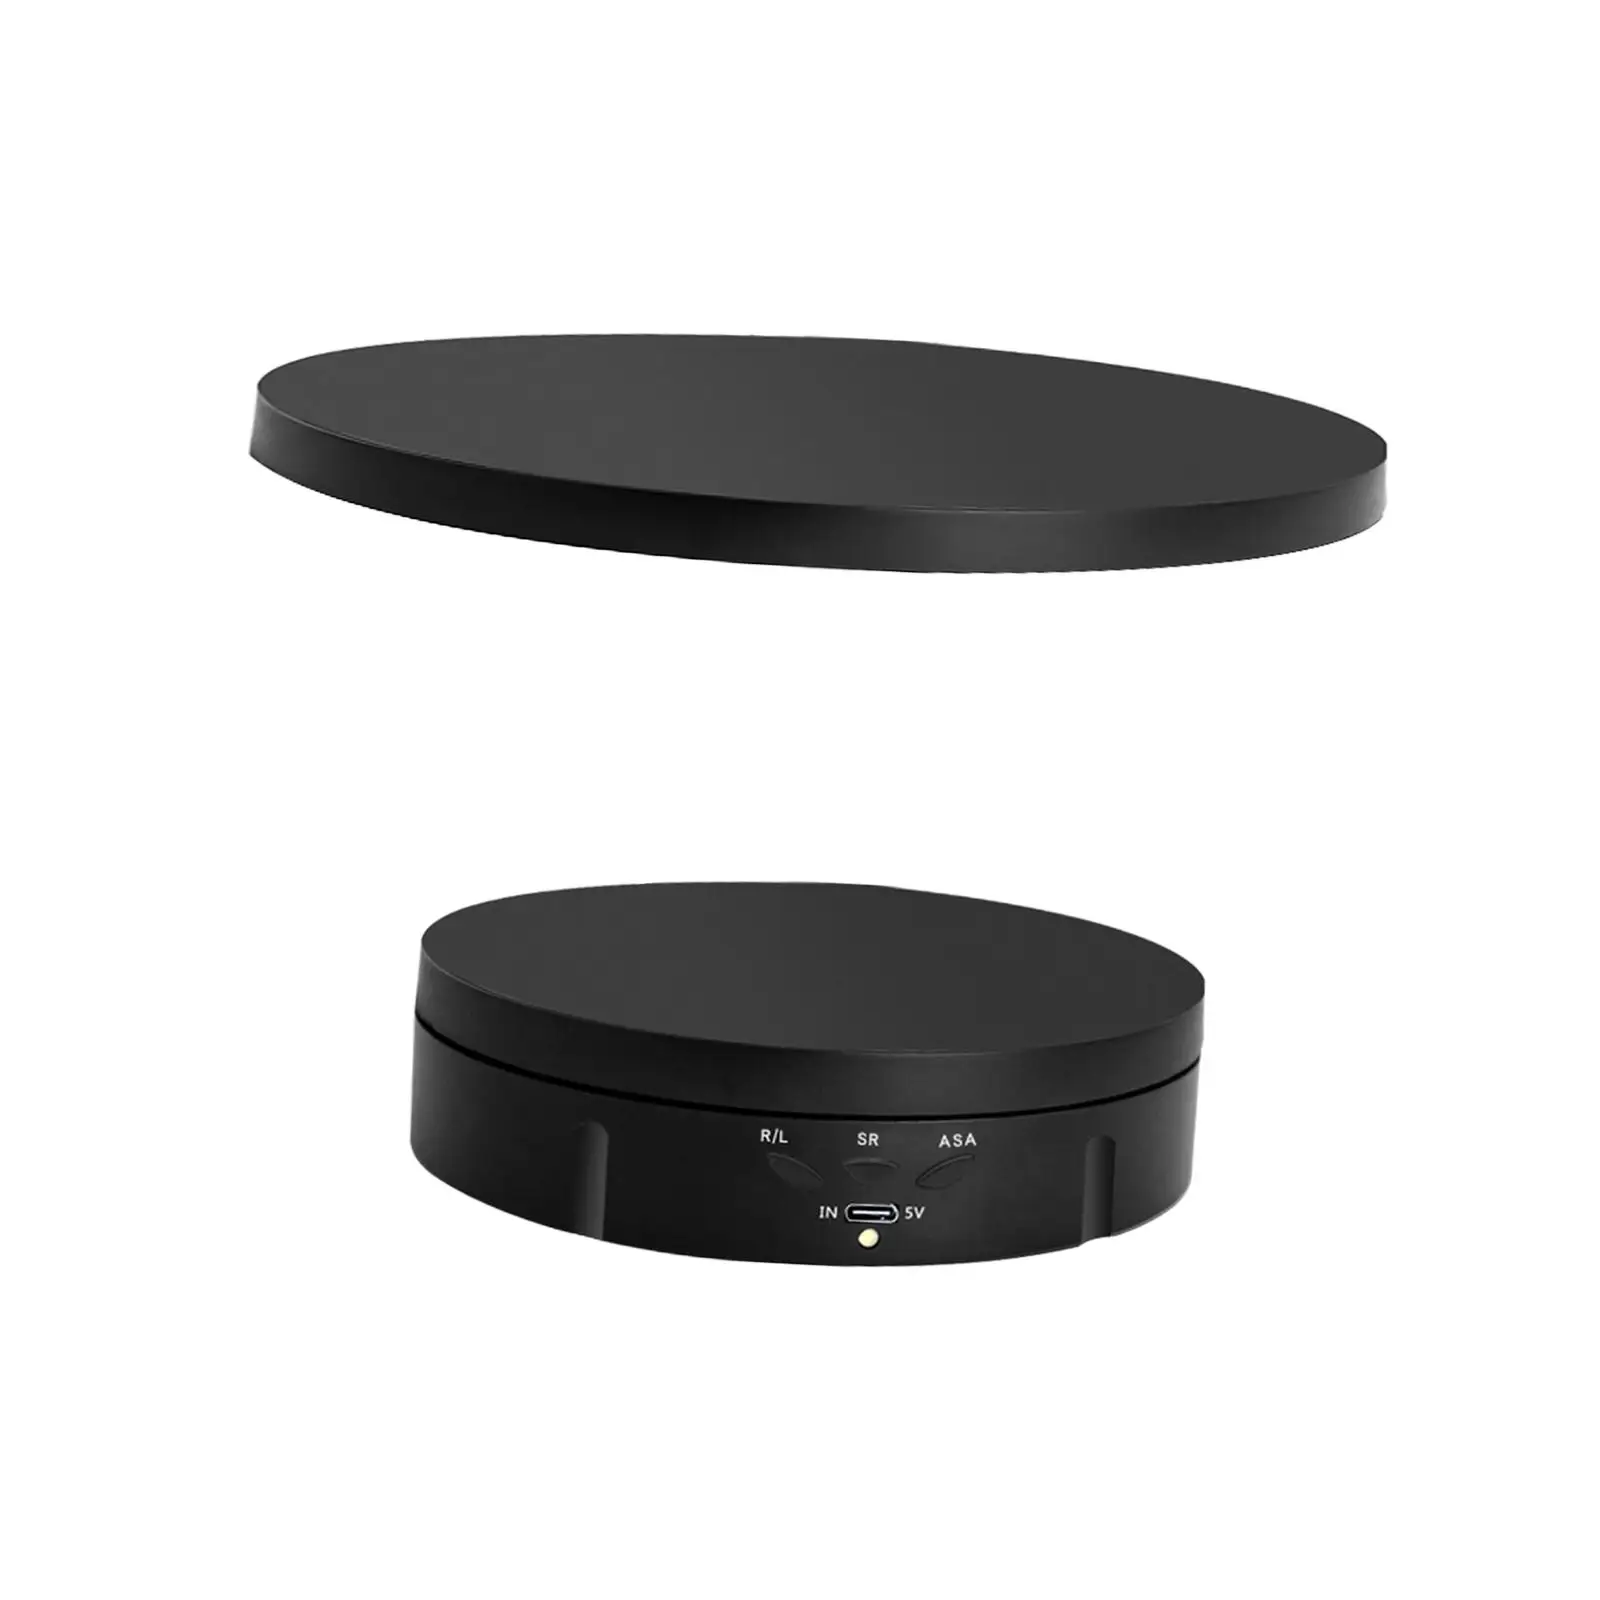 360 Degree Motorized Turntable Display Stand Automatic Revolving Platform Photography Turntable for Video Product Display Model